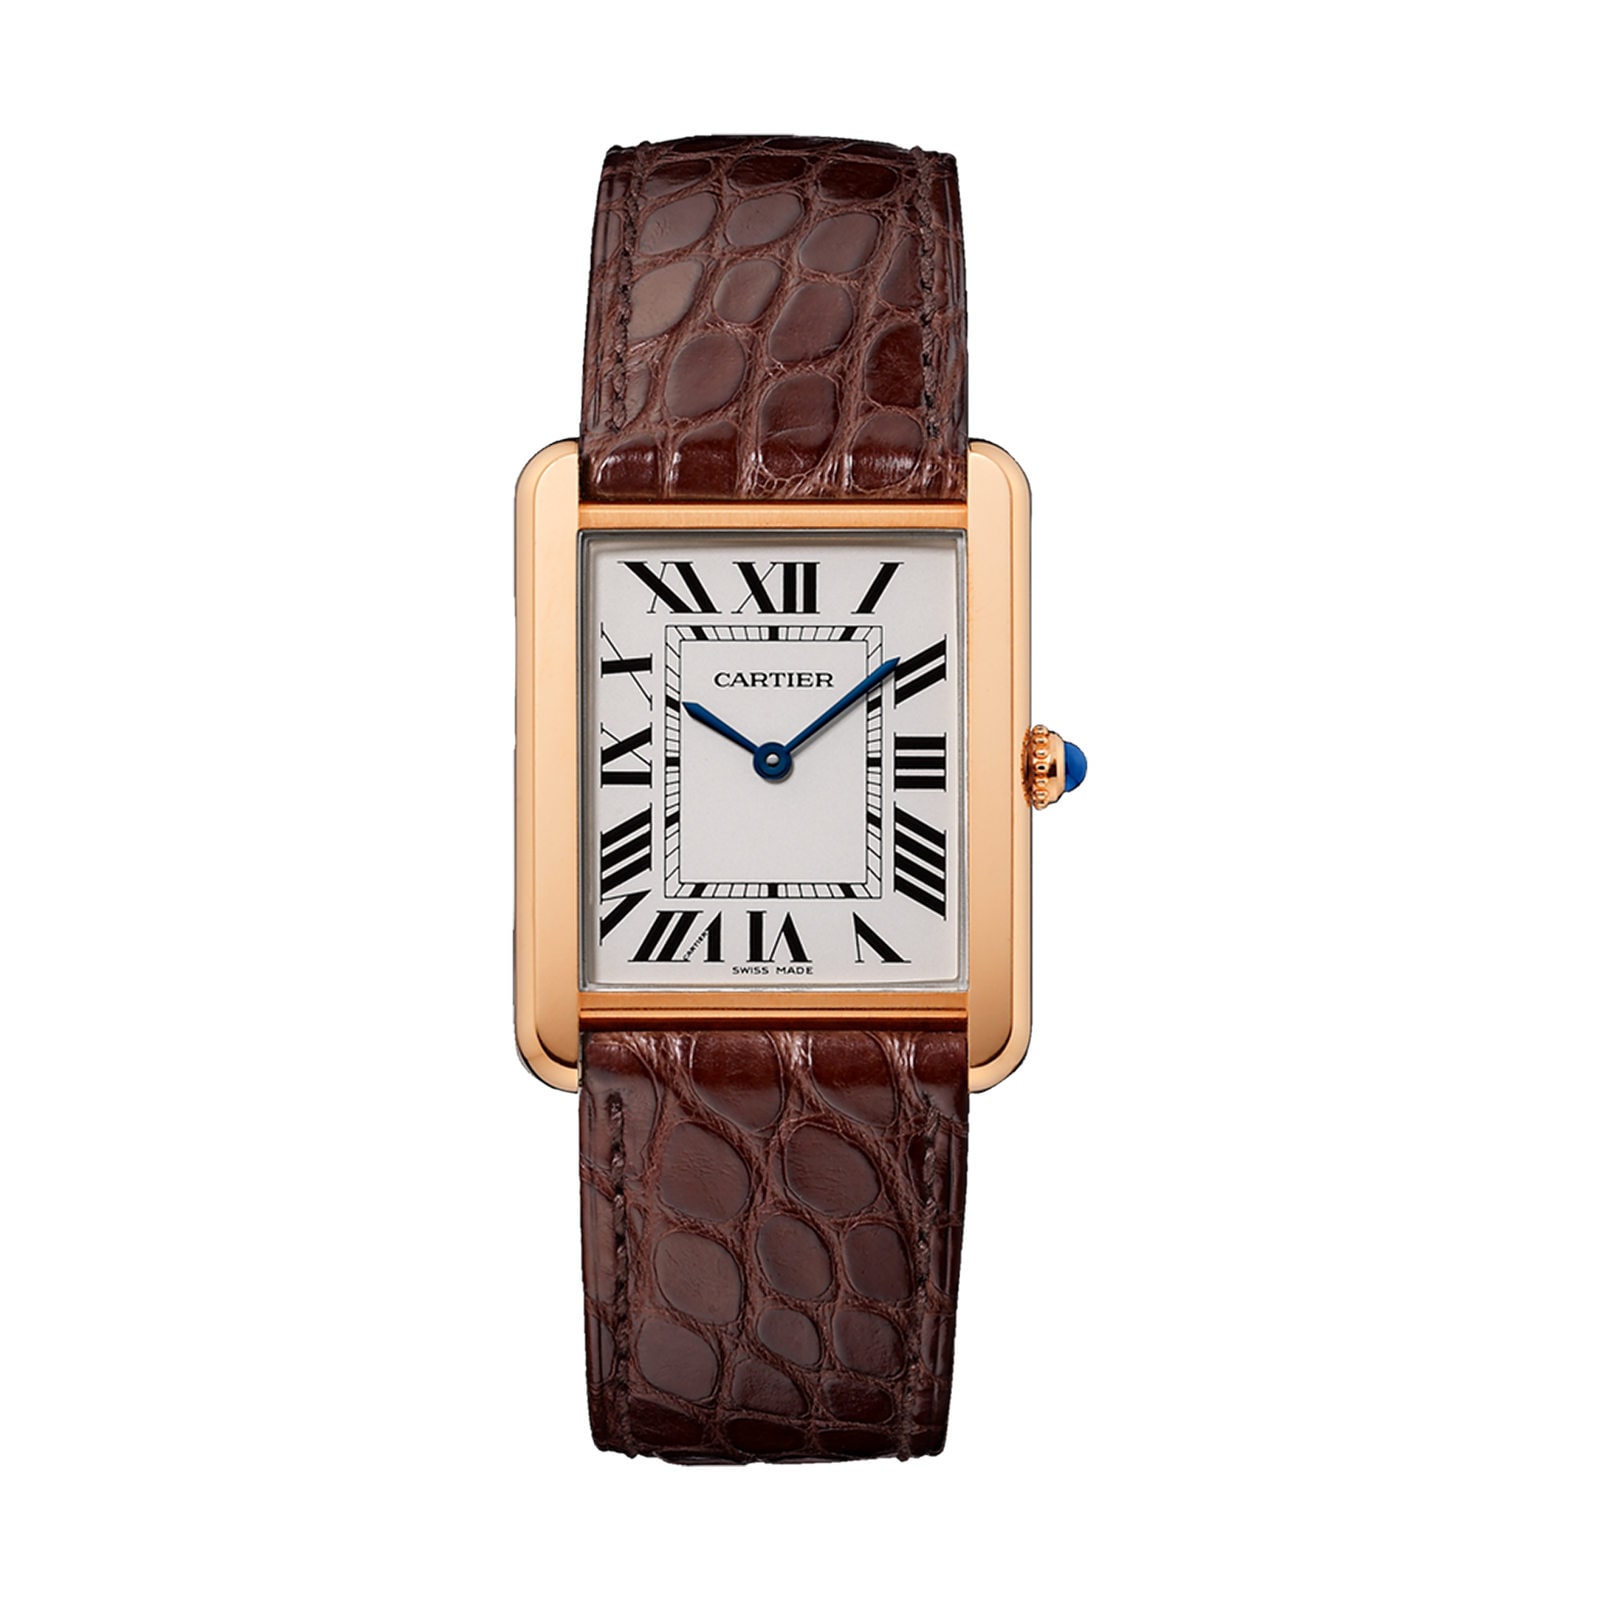 used cartier tank watches